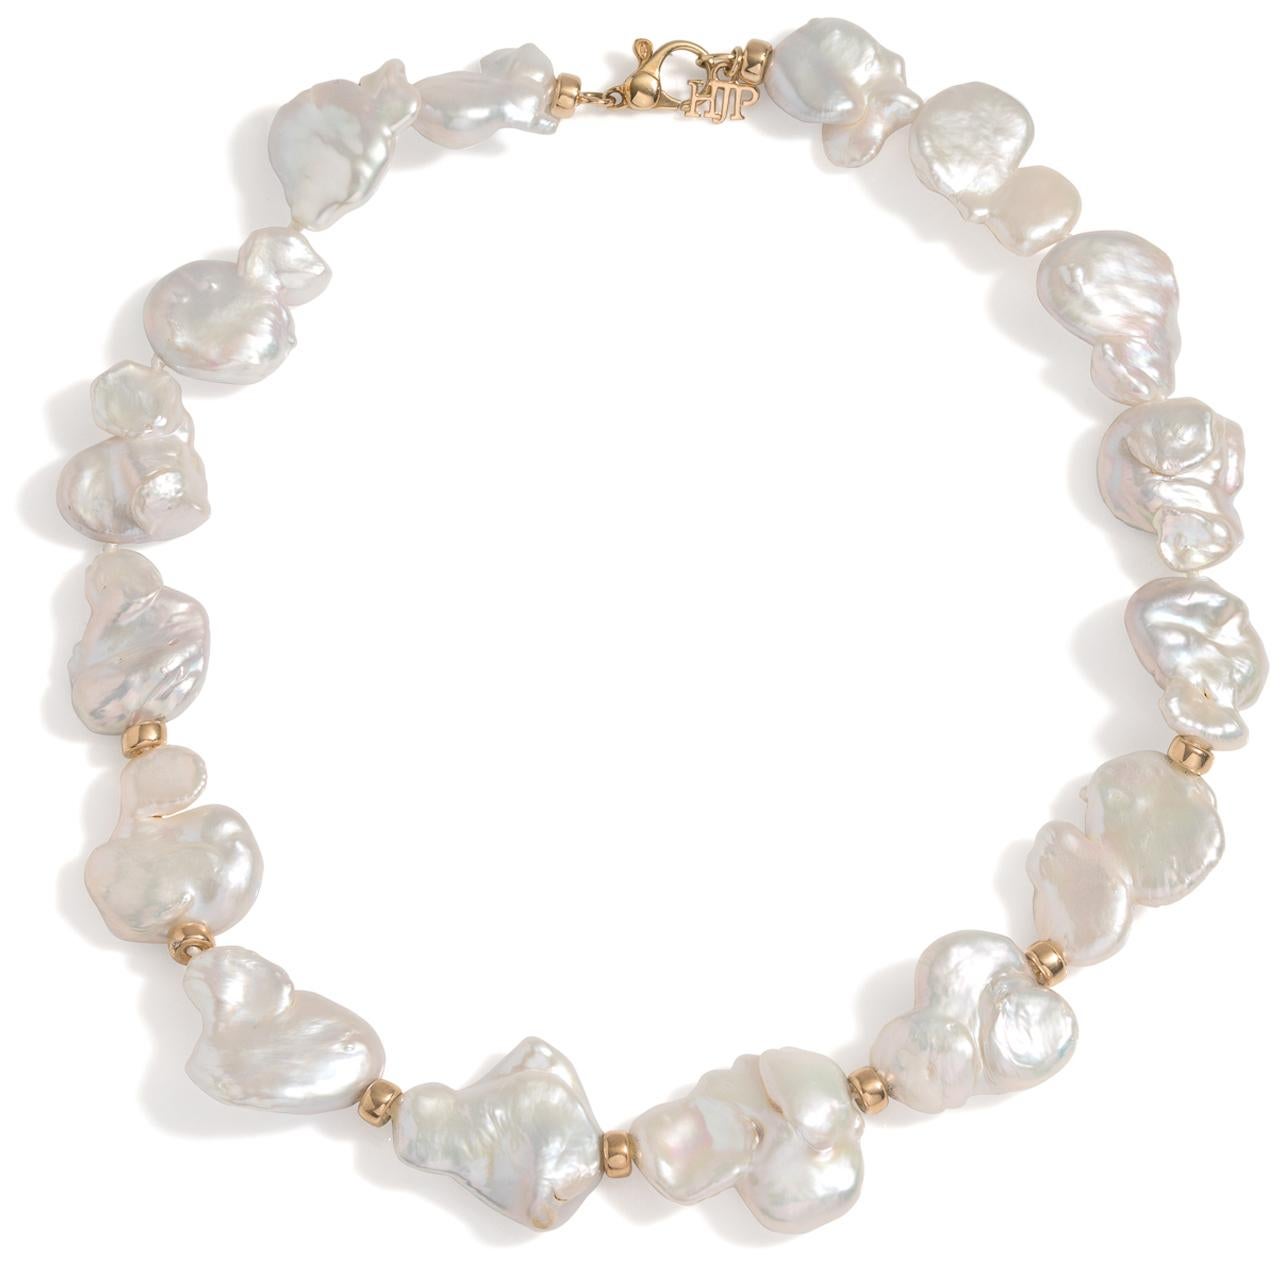 These lustrous Keshi Baroque Pearls lay on the neck like flower petals. Each pearl is knotted and strung with gold bead accents at the front of the strand.

Statement worthy, yet not over the top, this necklace is great as an update to your basic